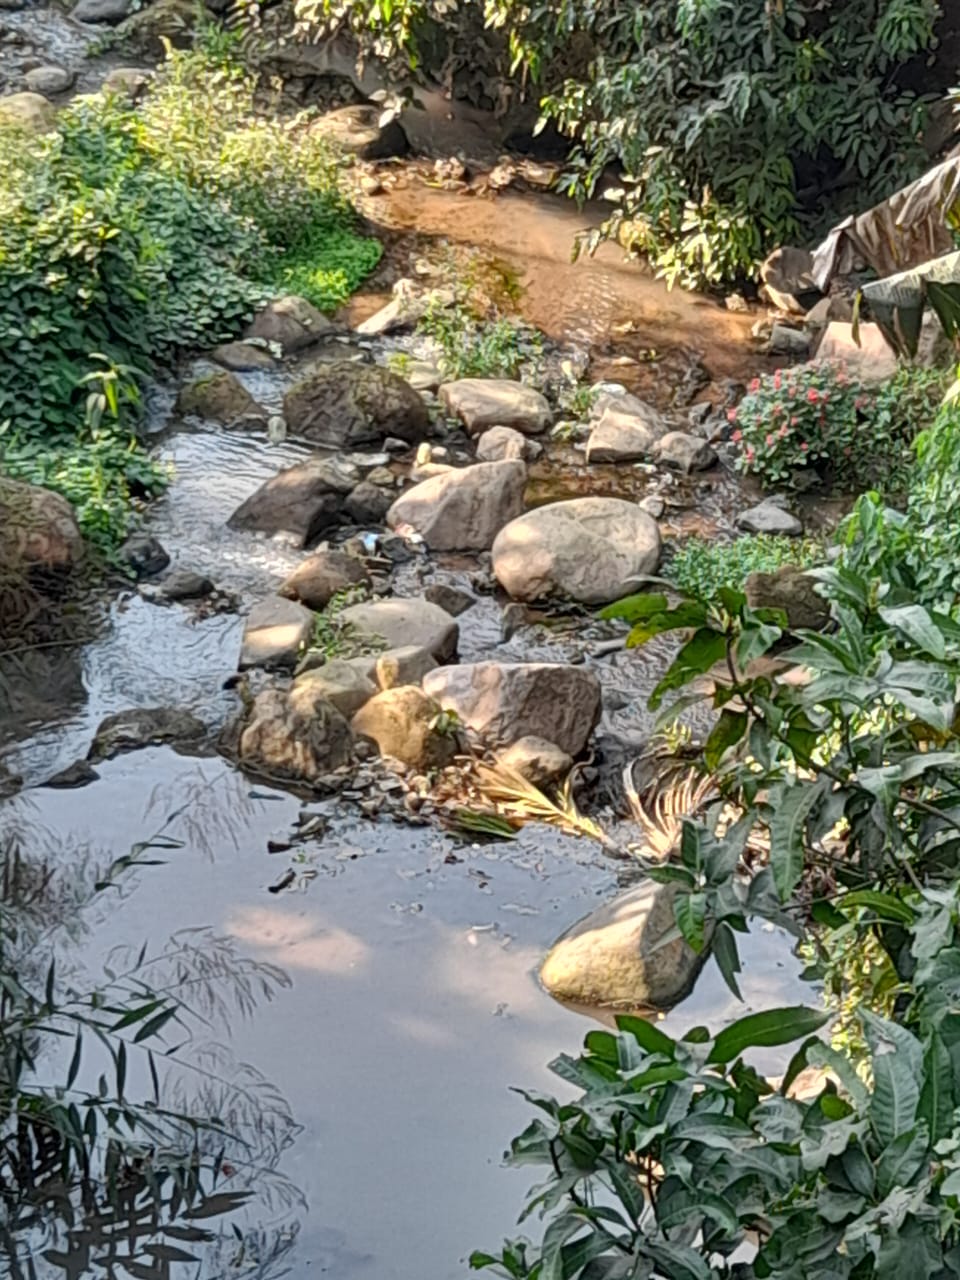 Gandrak stream that flows through Chandmari in Tura remains polluted due to waste discharge